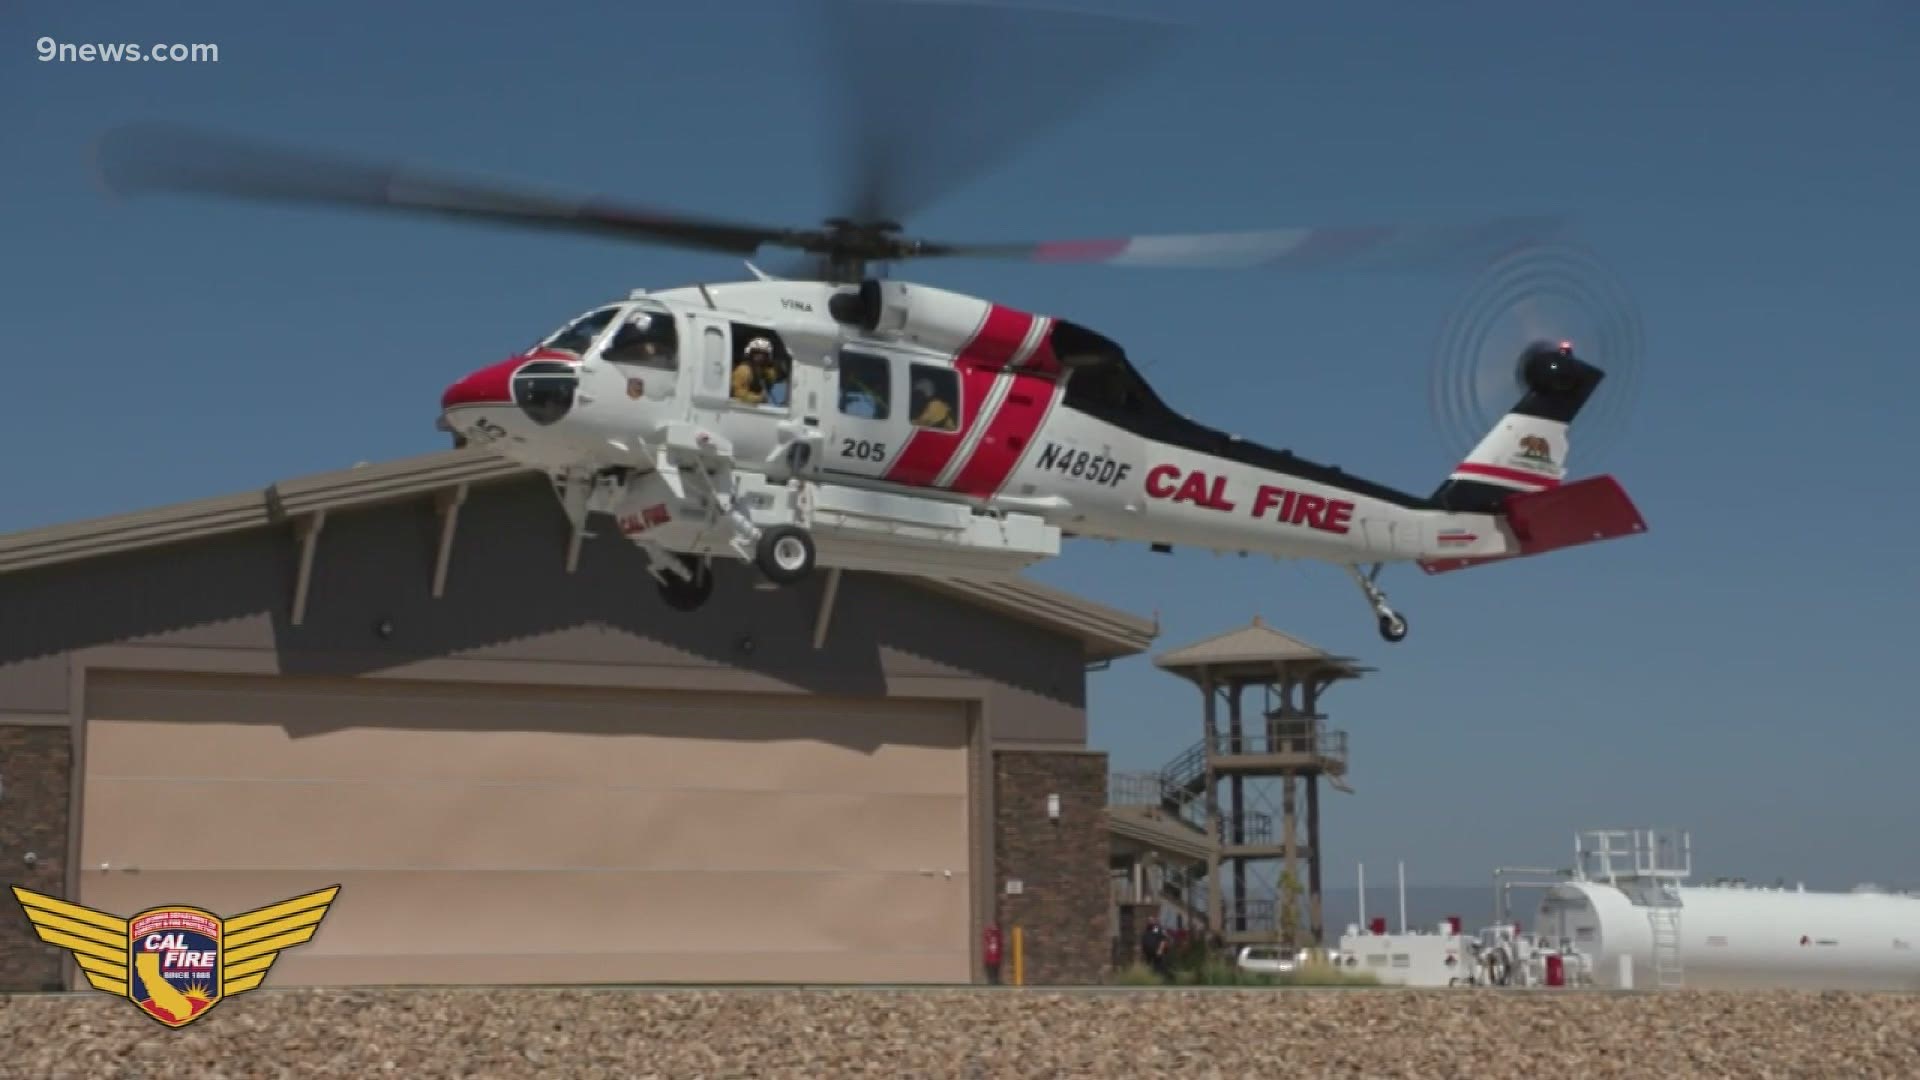 The specialized helicopter can help fire crews fight wildfires before they explode in size.